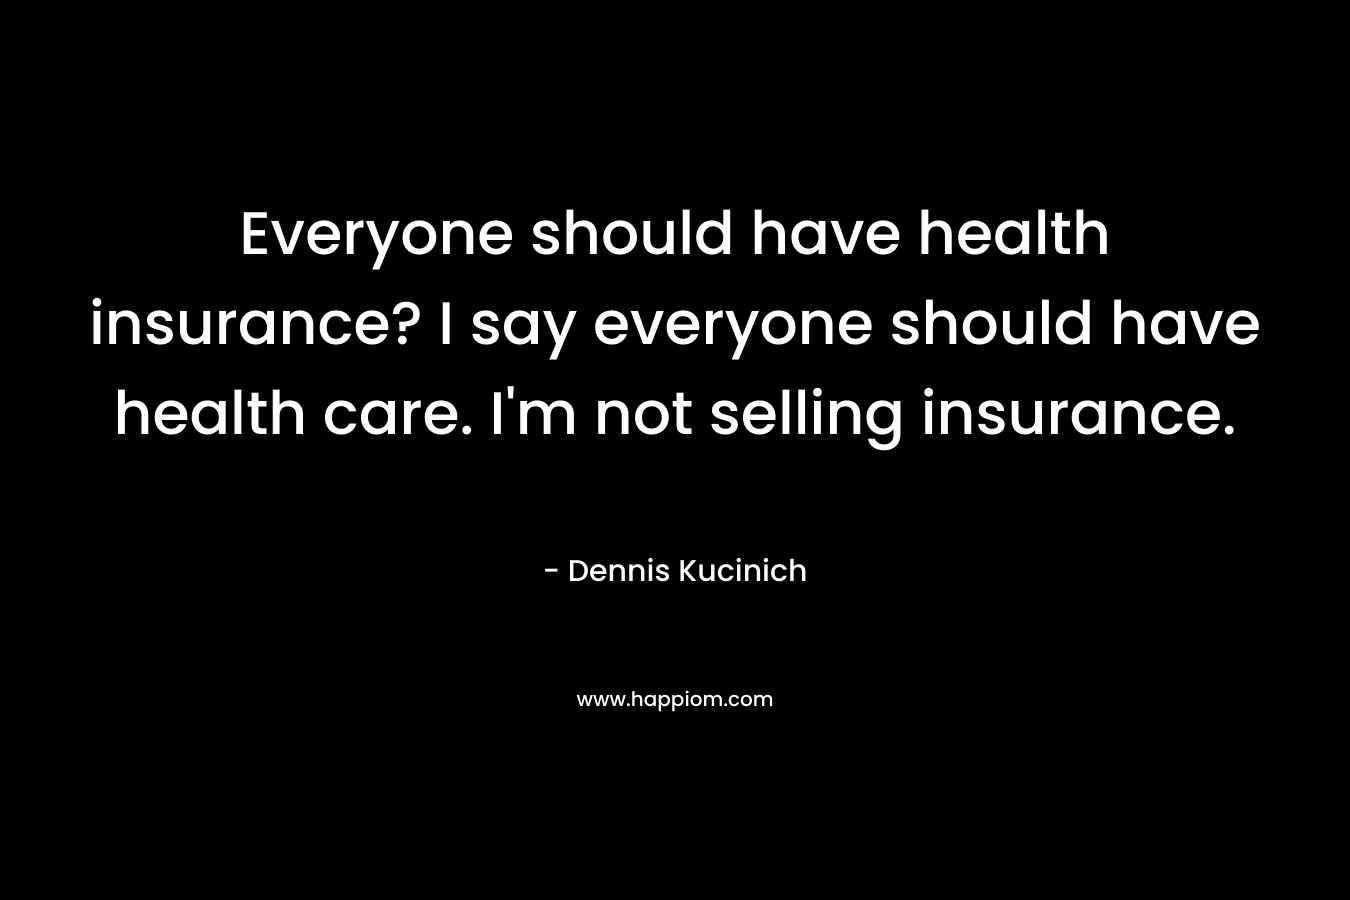 Everyone should have health insurance? I say everyone should have health care. I’m not selling insurance. – Dennis Kucinich